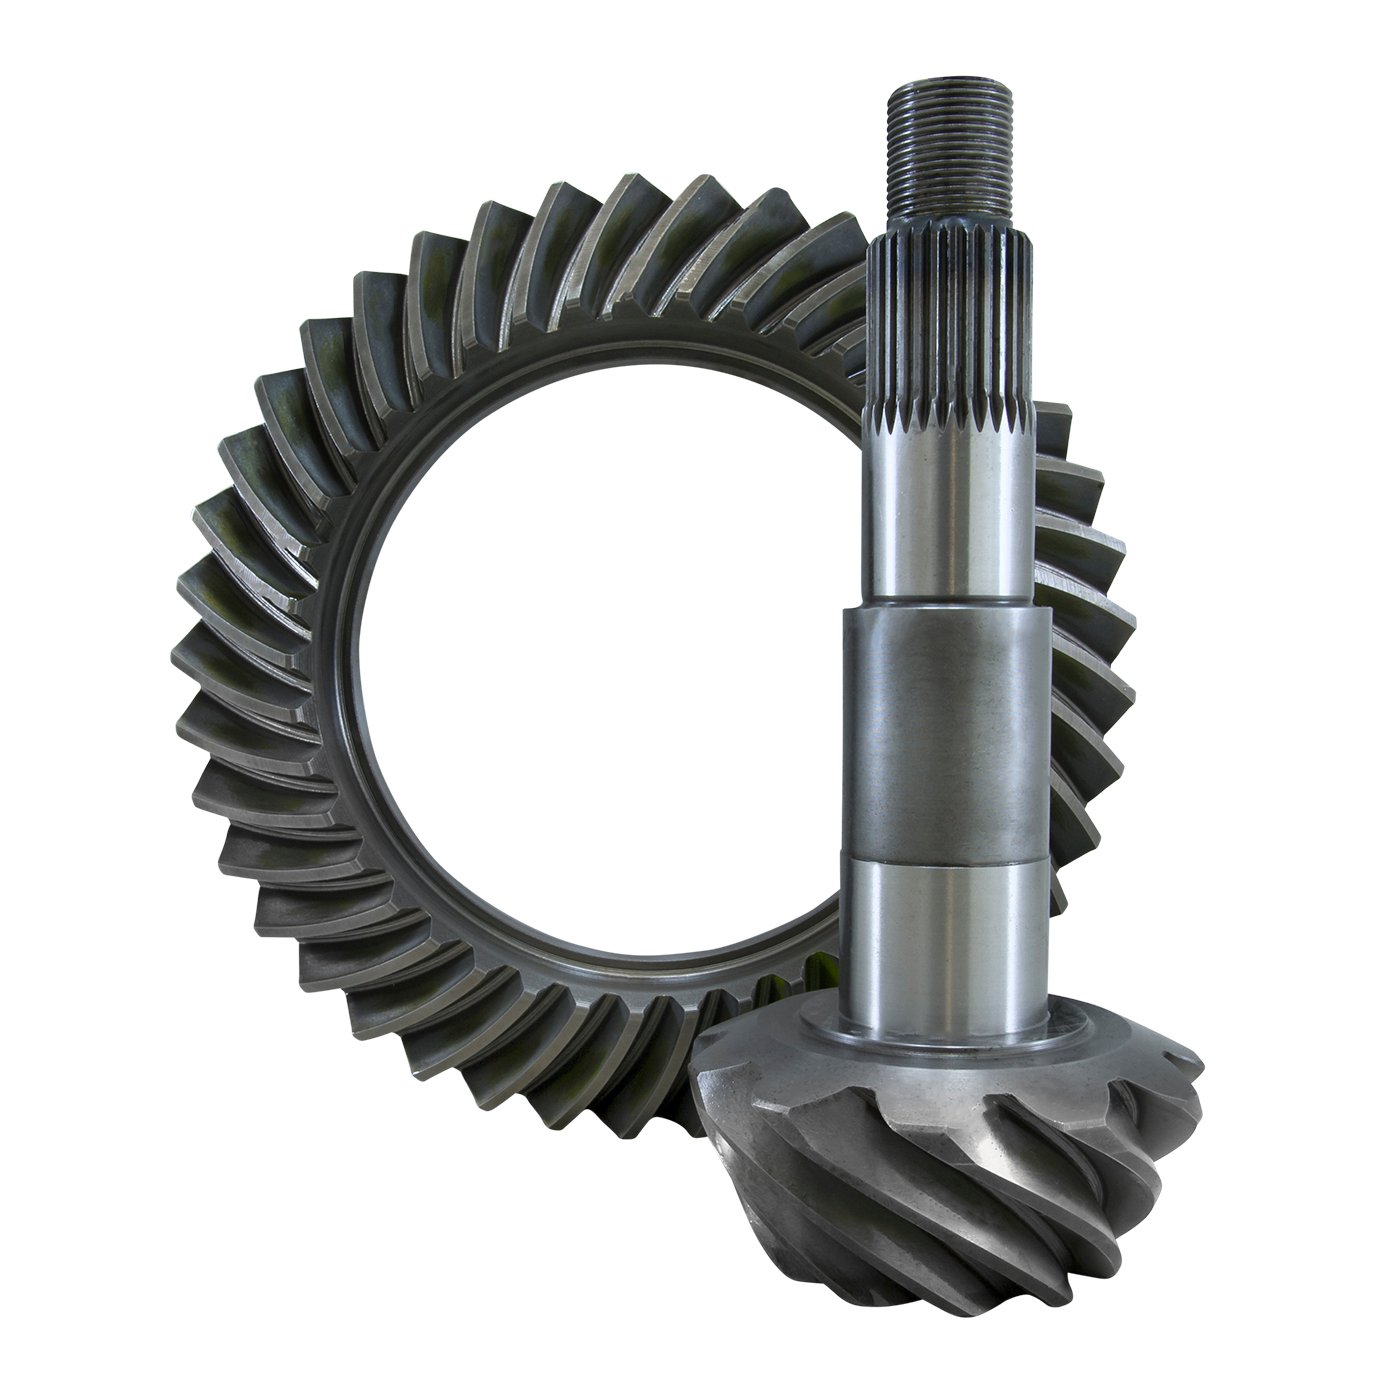 USA Standard 36282 Ring & Pinion Gear Set, For GM & Chrysler 11.5 in. Rear, 3.73 Ratio